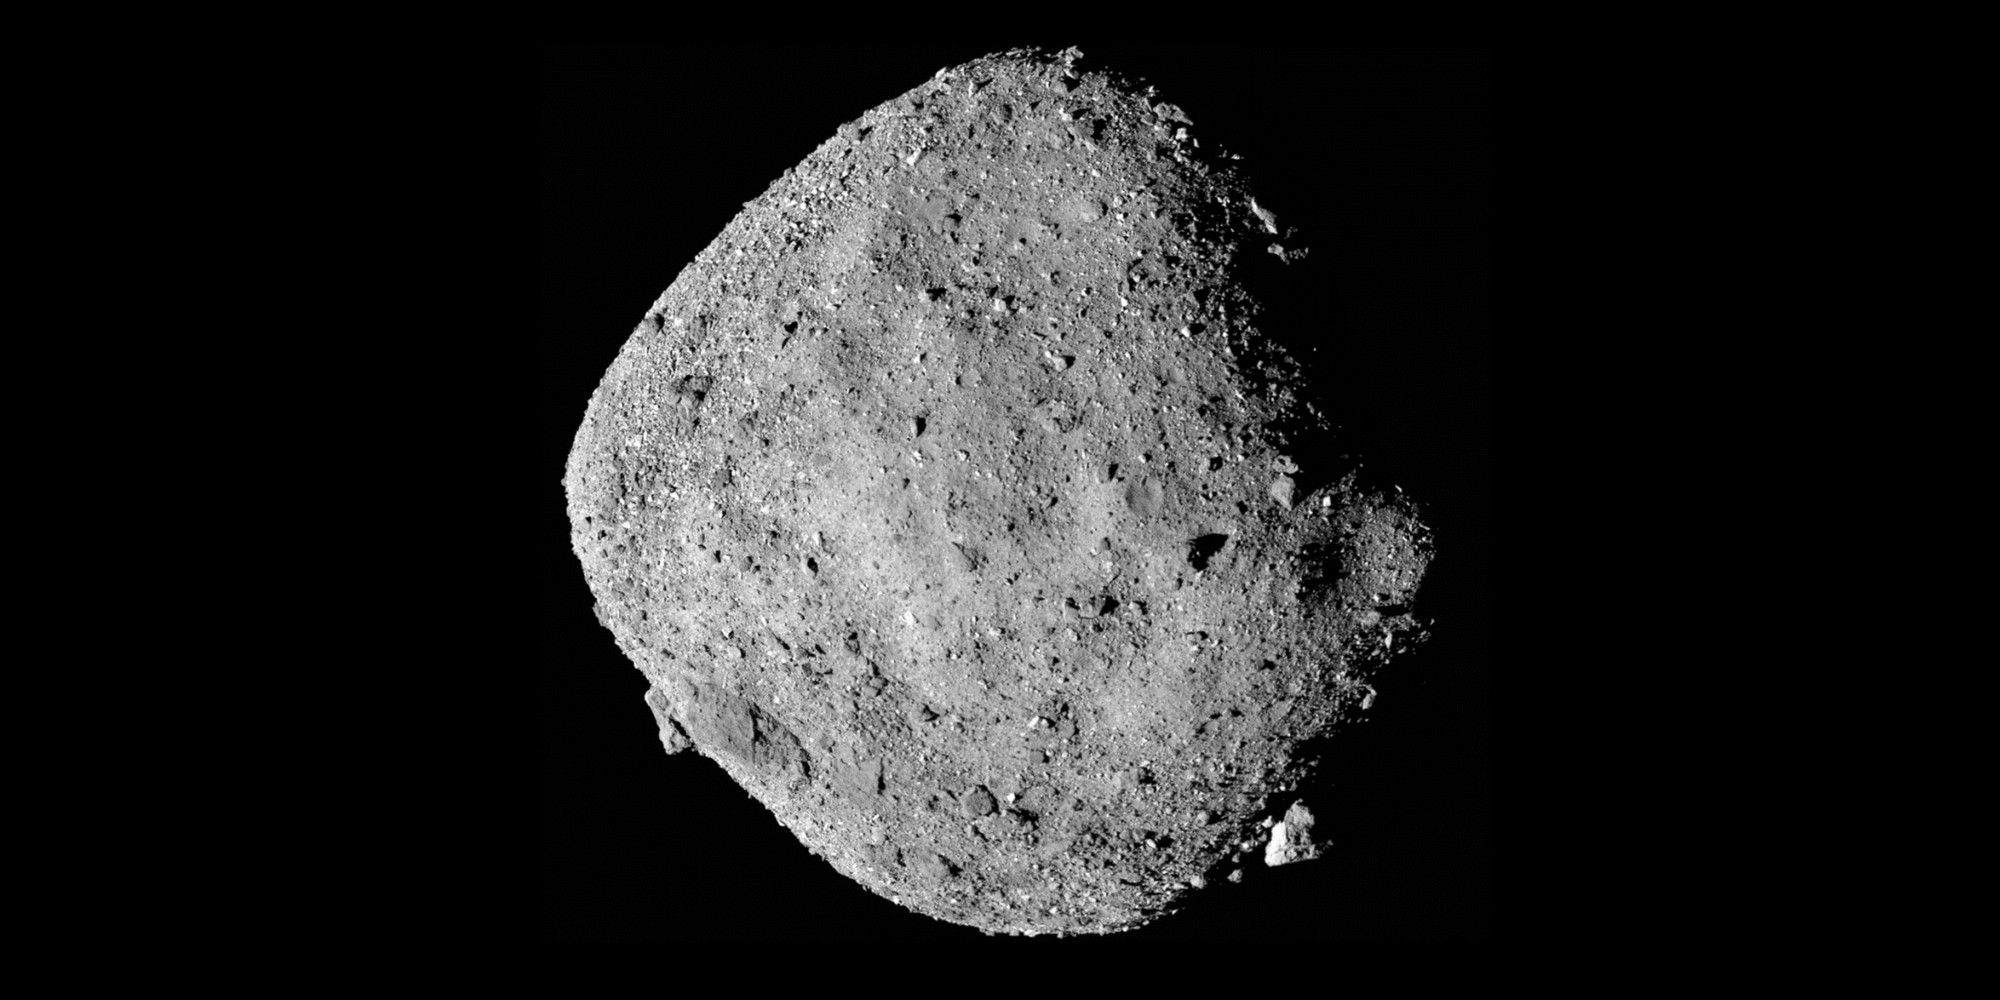 Bennu Asteroid Has A Higher Chance Of Hitting Earth Than Scientists Thought